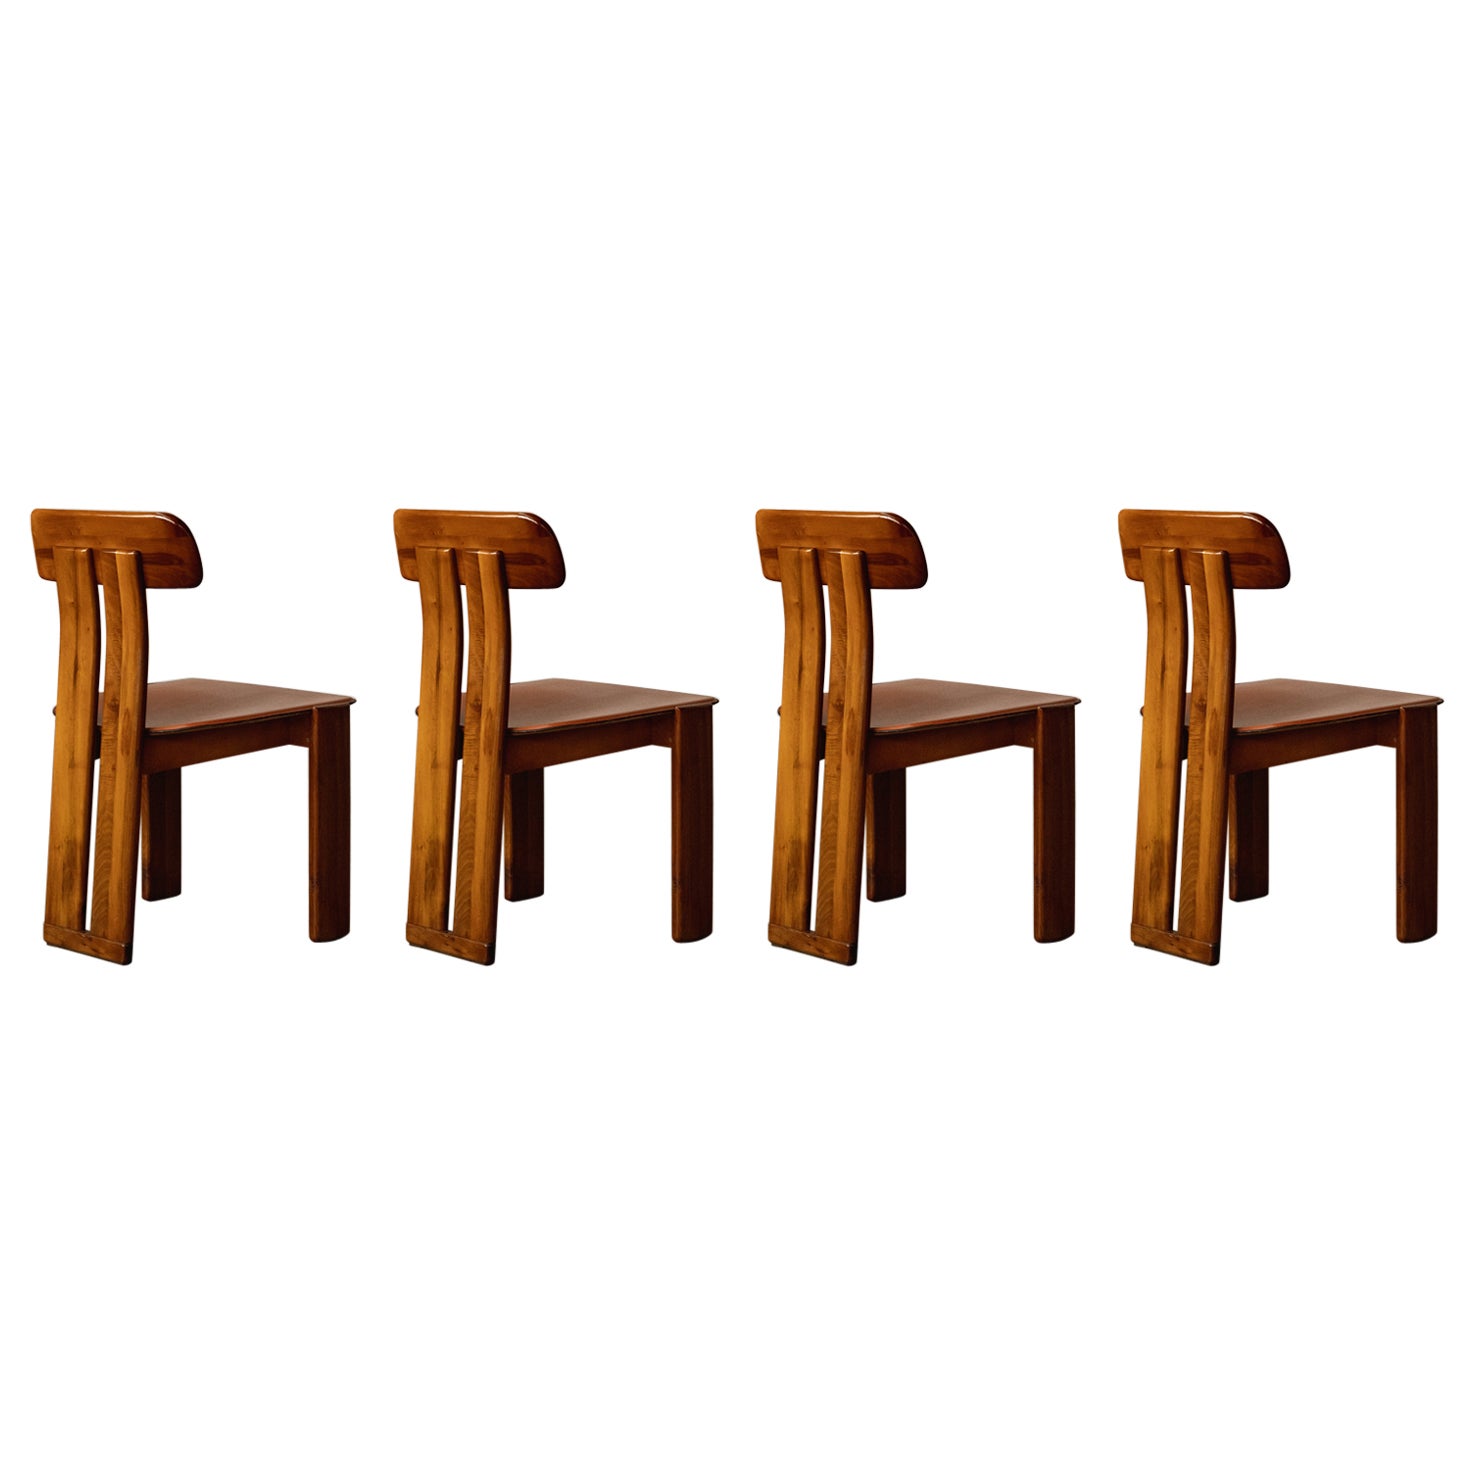 Mario Marenco "Sapporo" Chairs for Mobil Girgi, 1970, Set of 4 For Sale